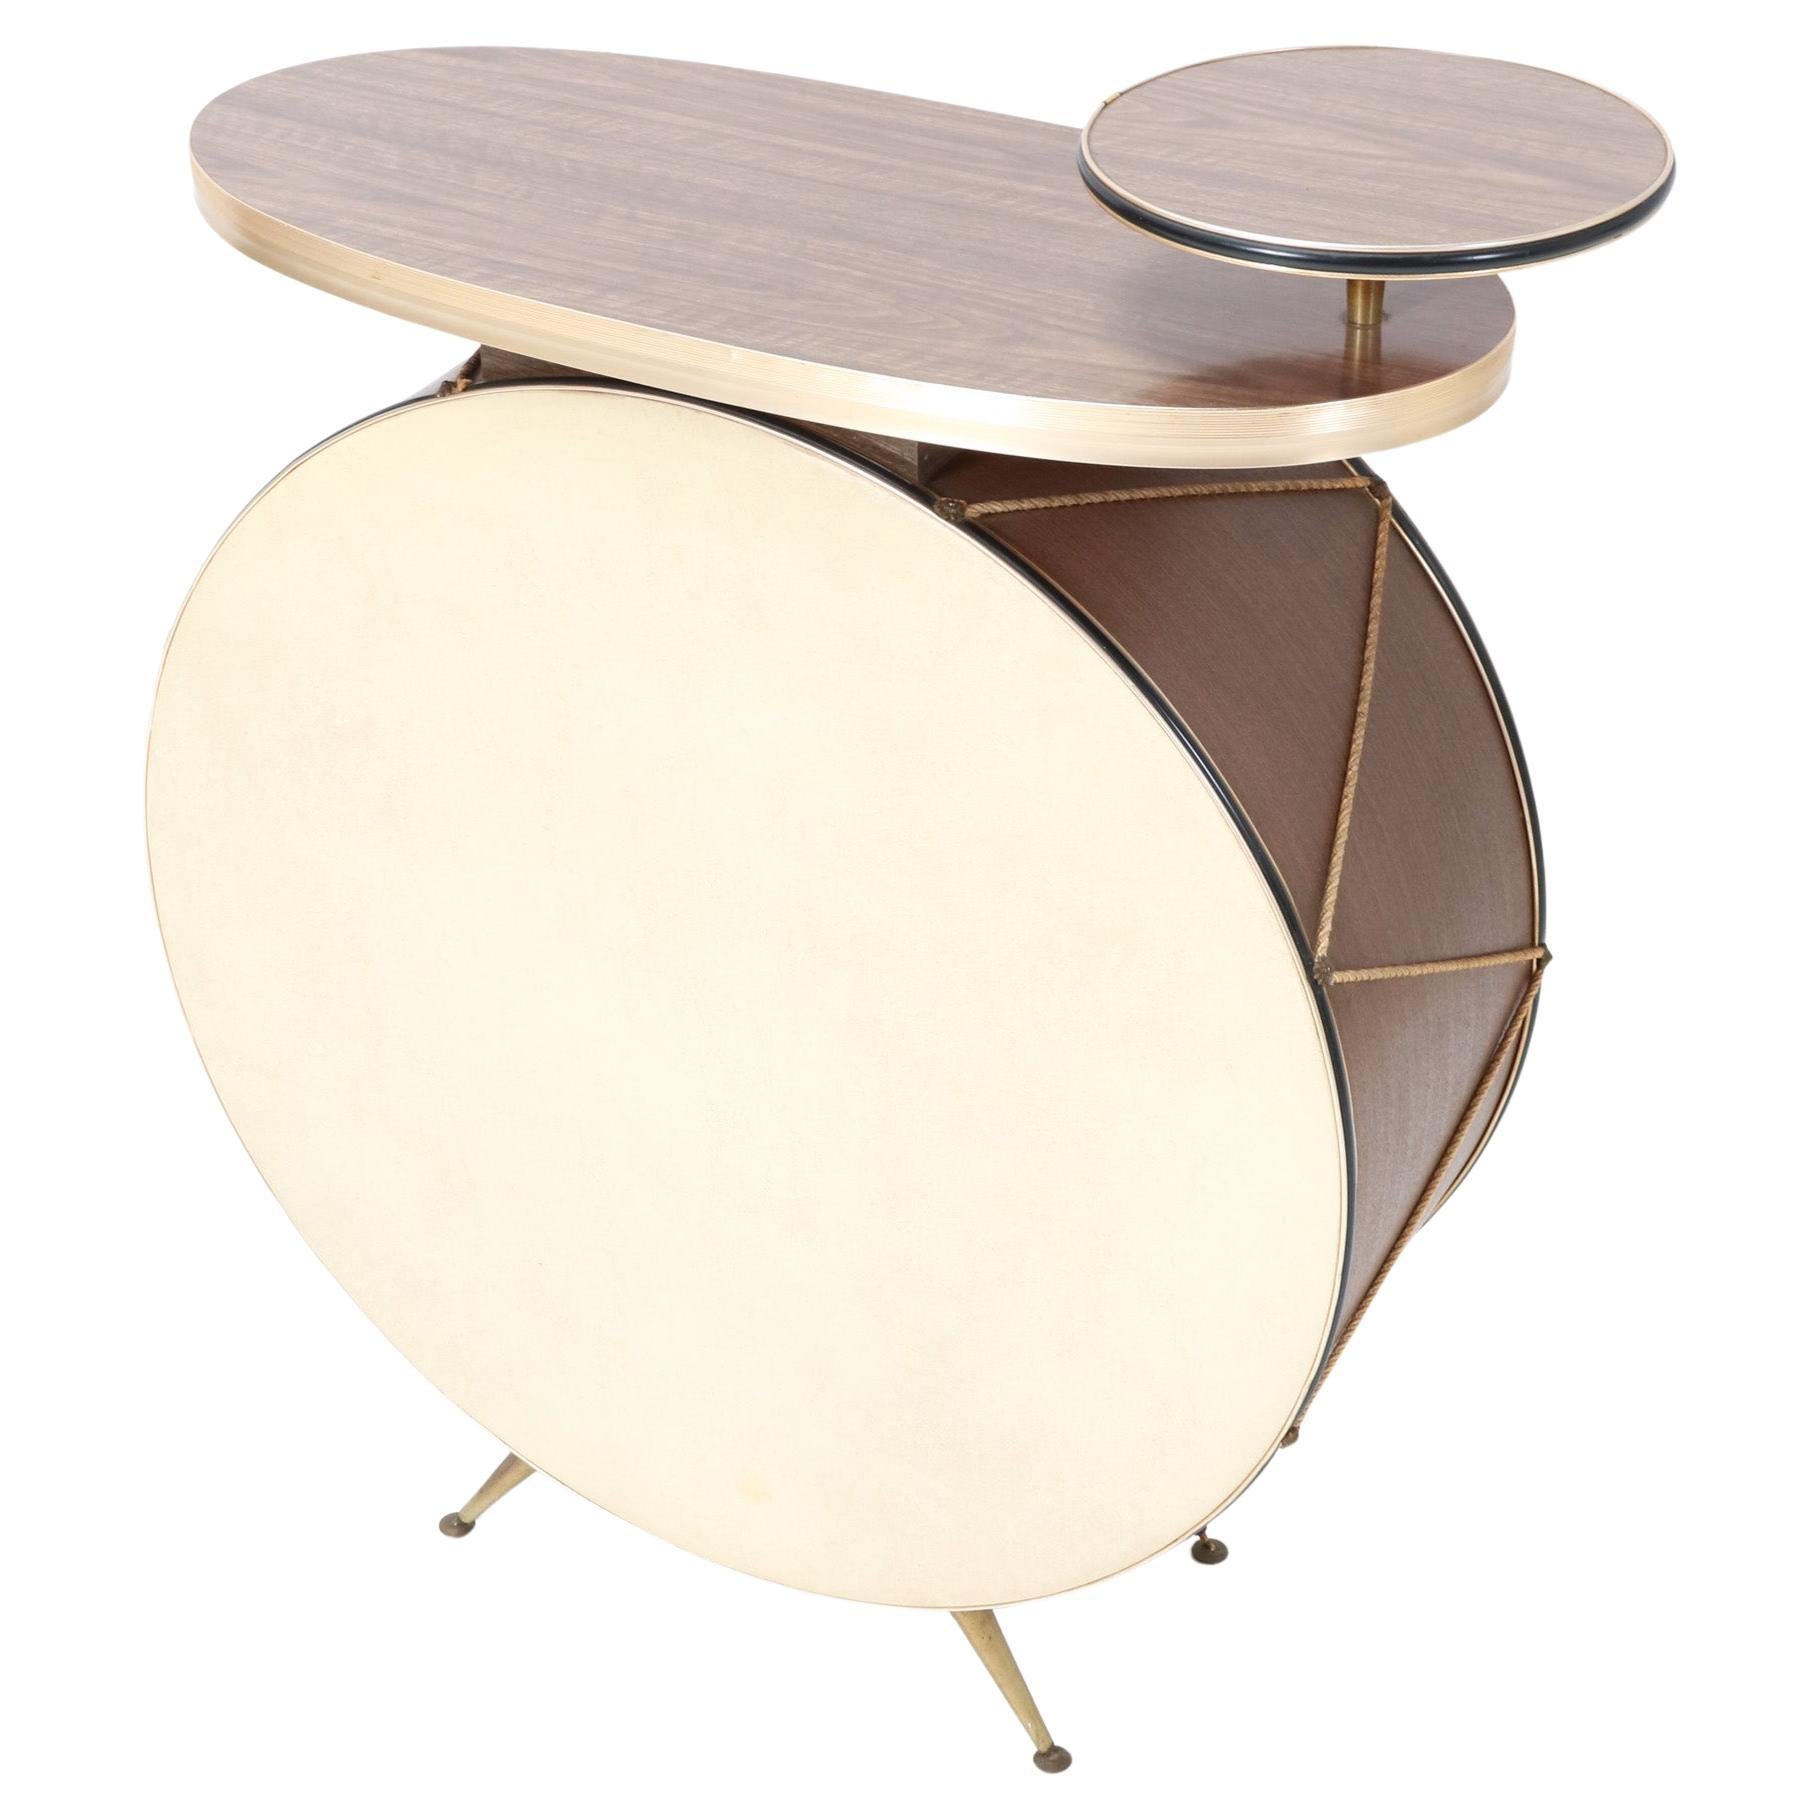 English Mid-Century Modern Drum Dry Bar by Barget Built, 1960s